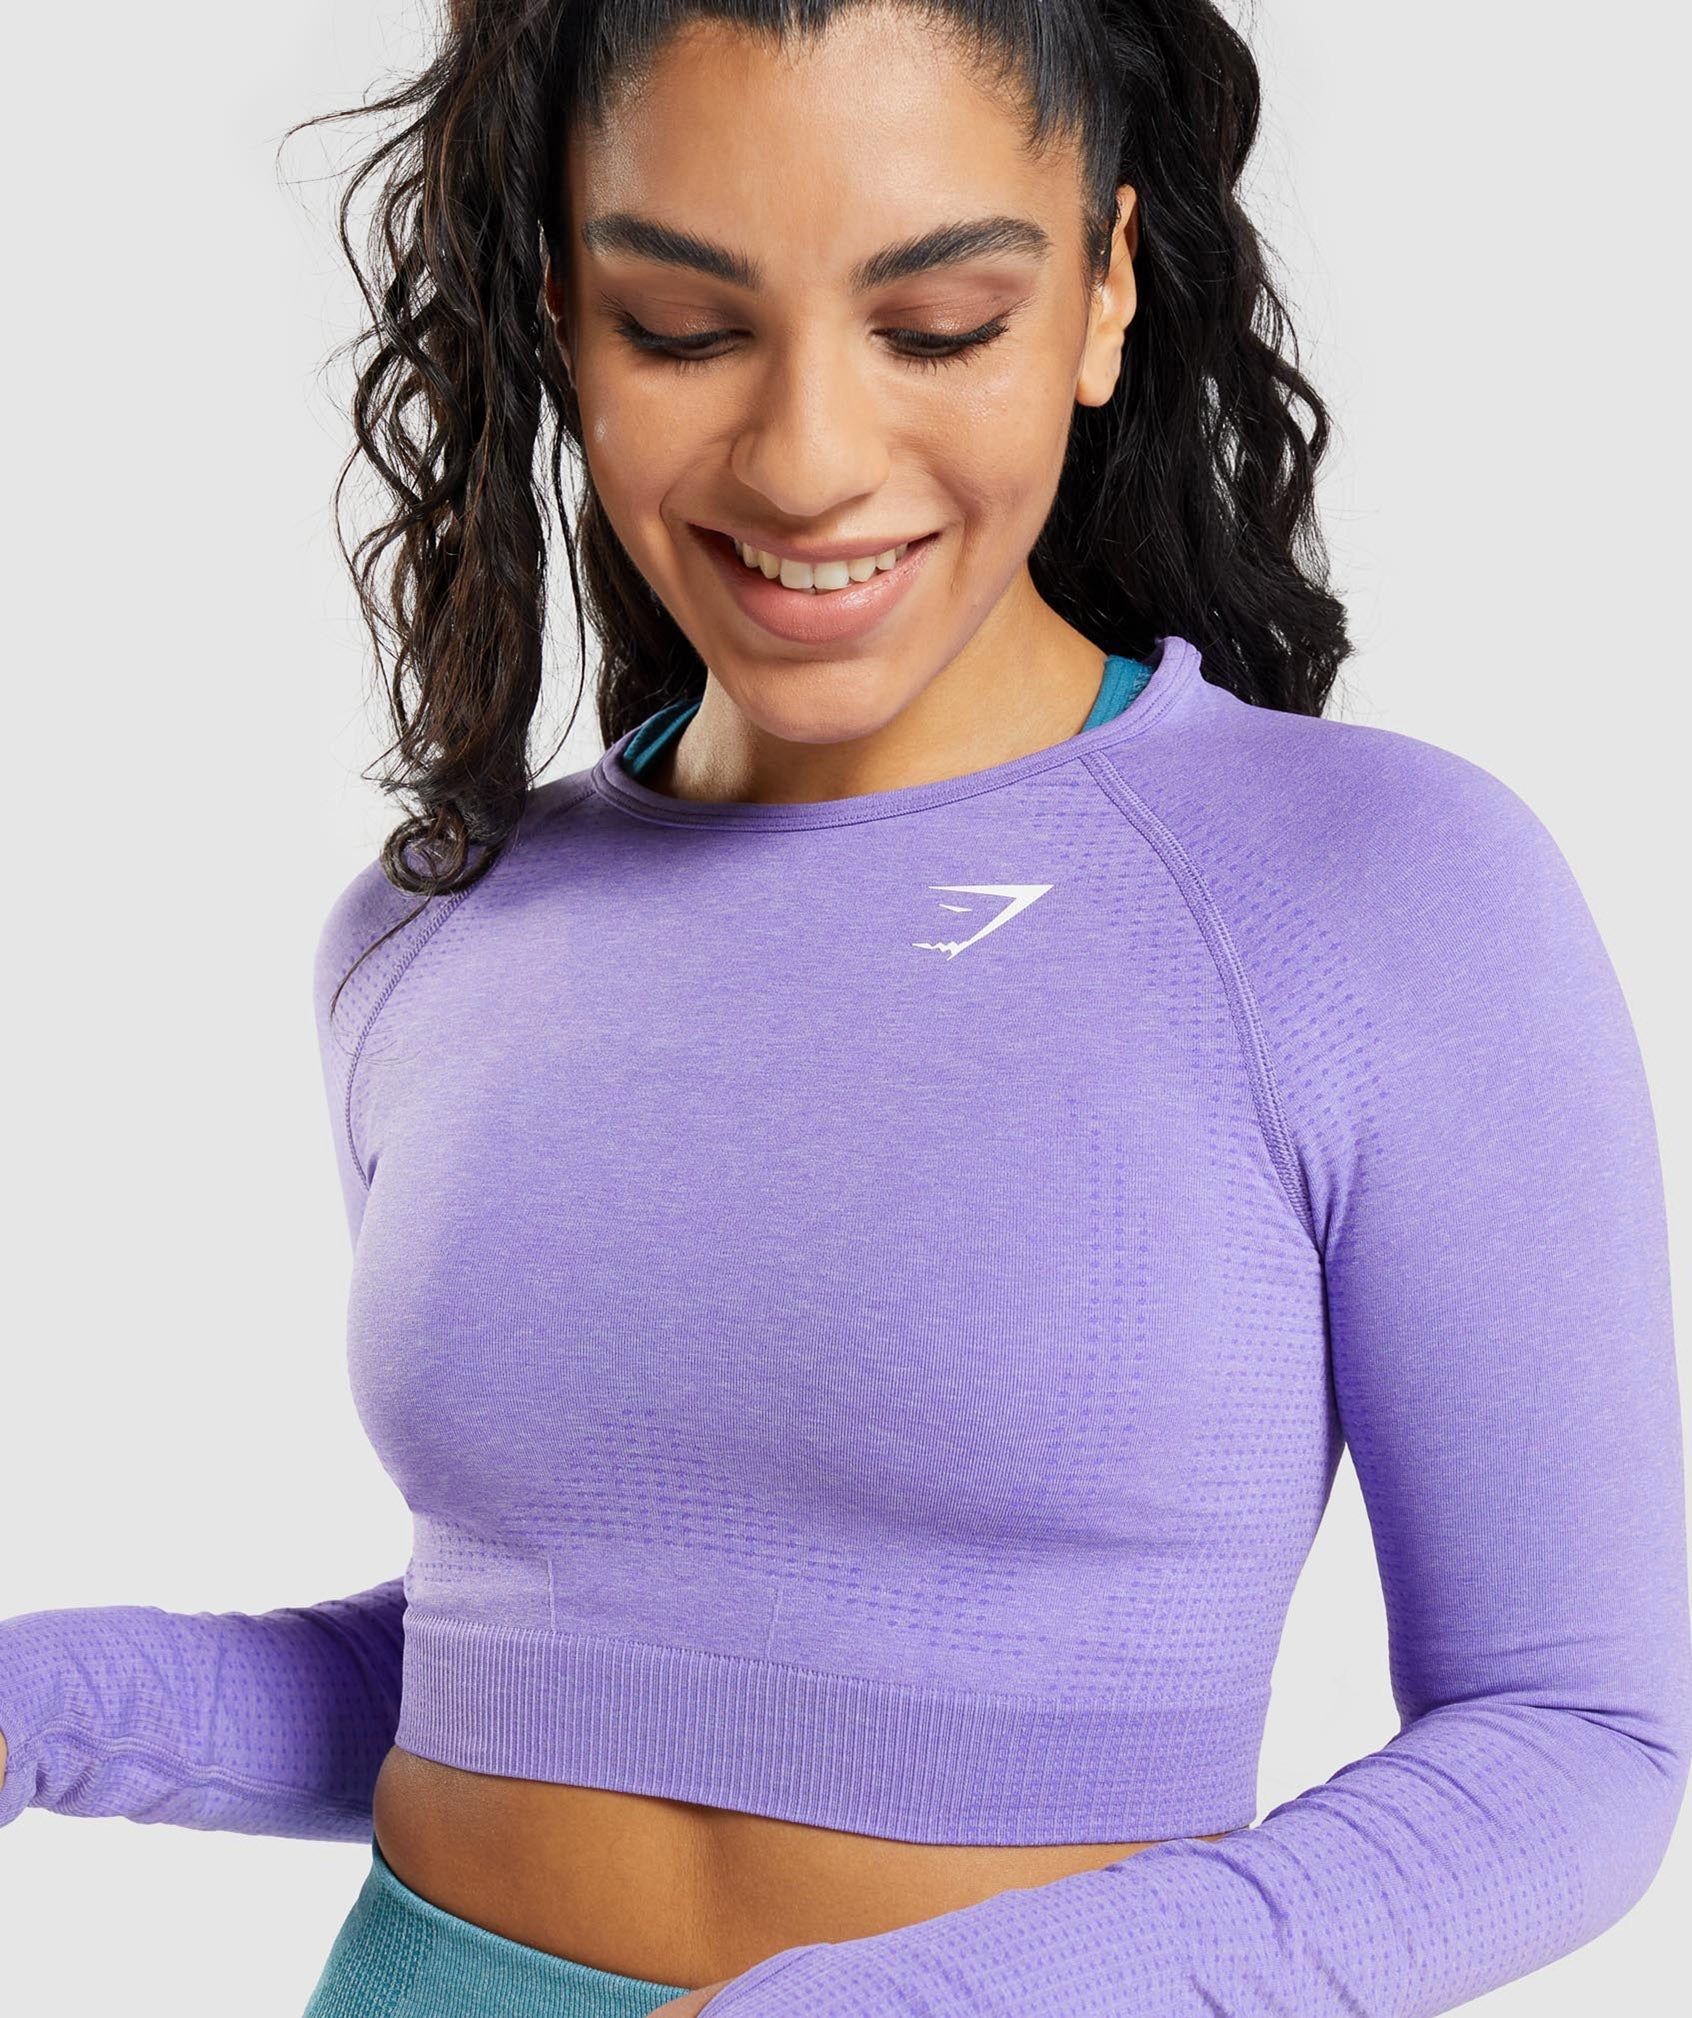 AYBL Elevate Seamless Long Sleeve Crop Top - Purple is a perfect gift for  any occasion